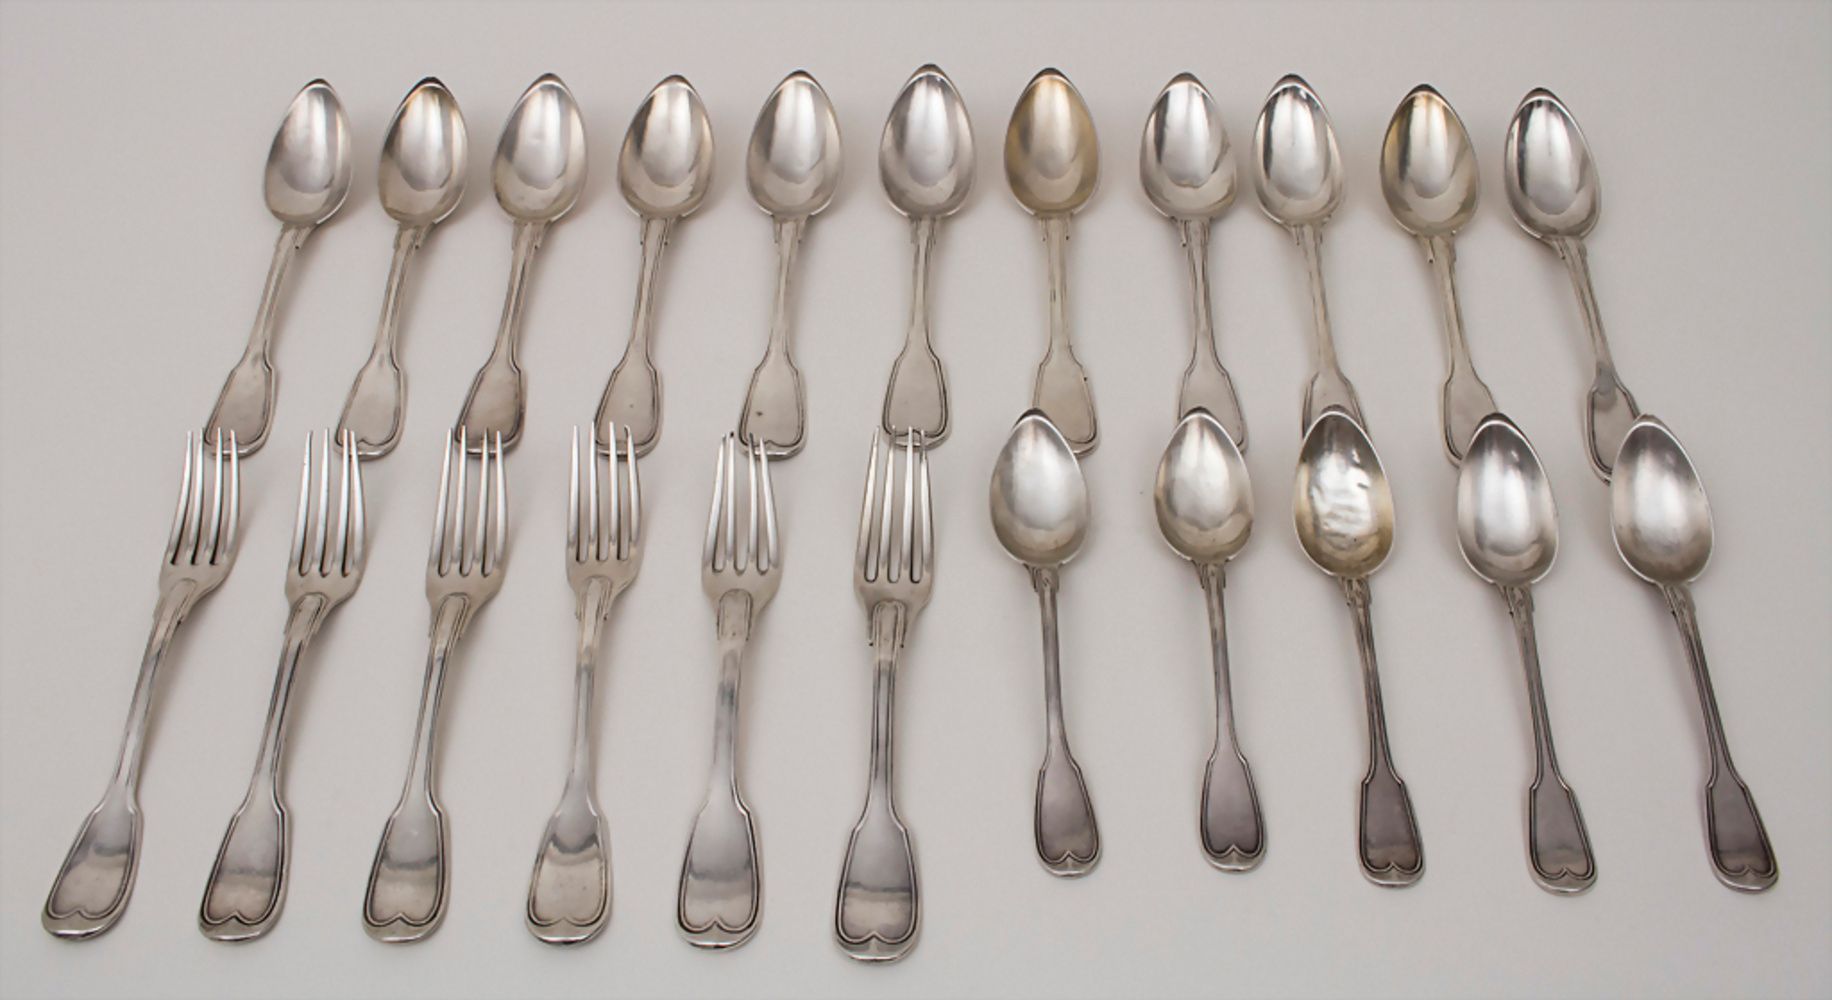 Restbesteck / Silver cutlery, Paris, 19. Jh Material: silver 950/1000, 16 spoons&hellip;